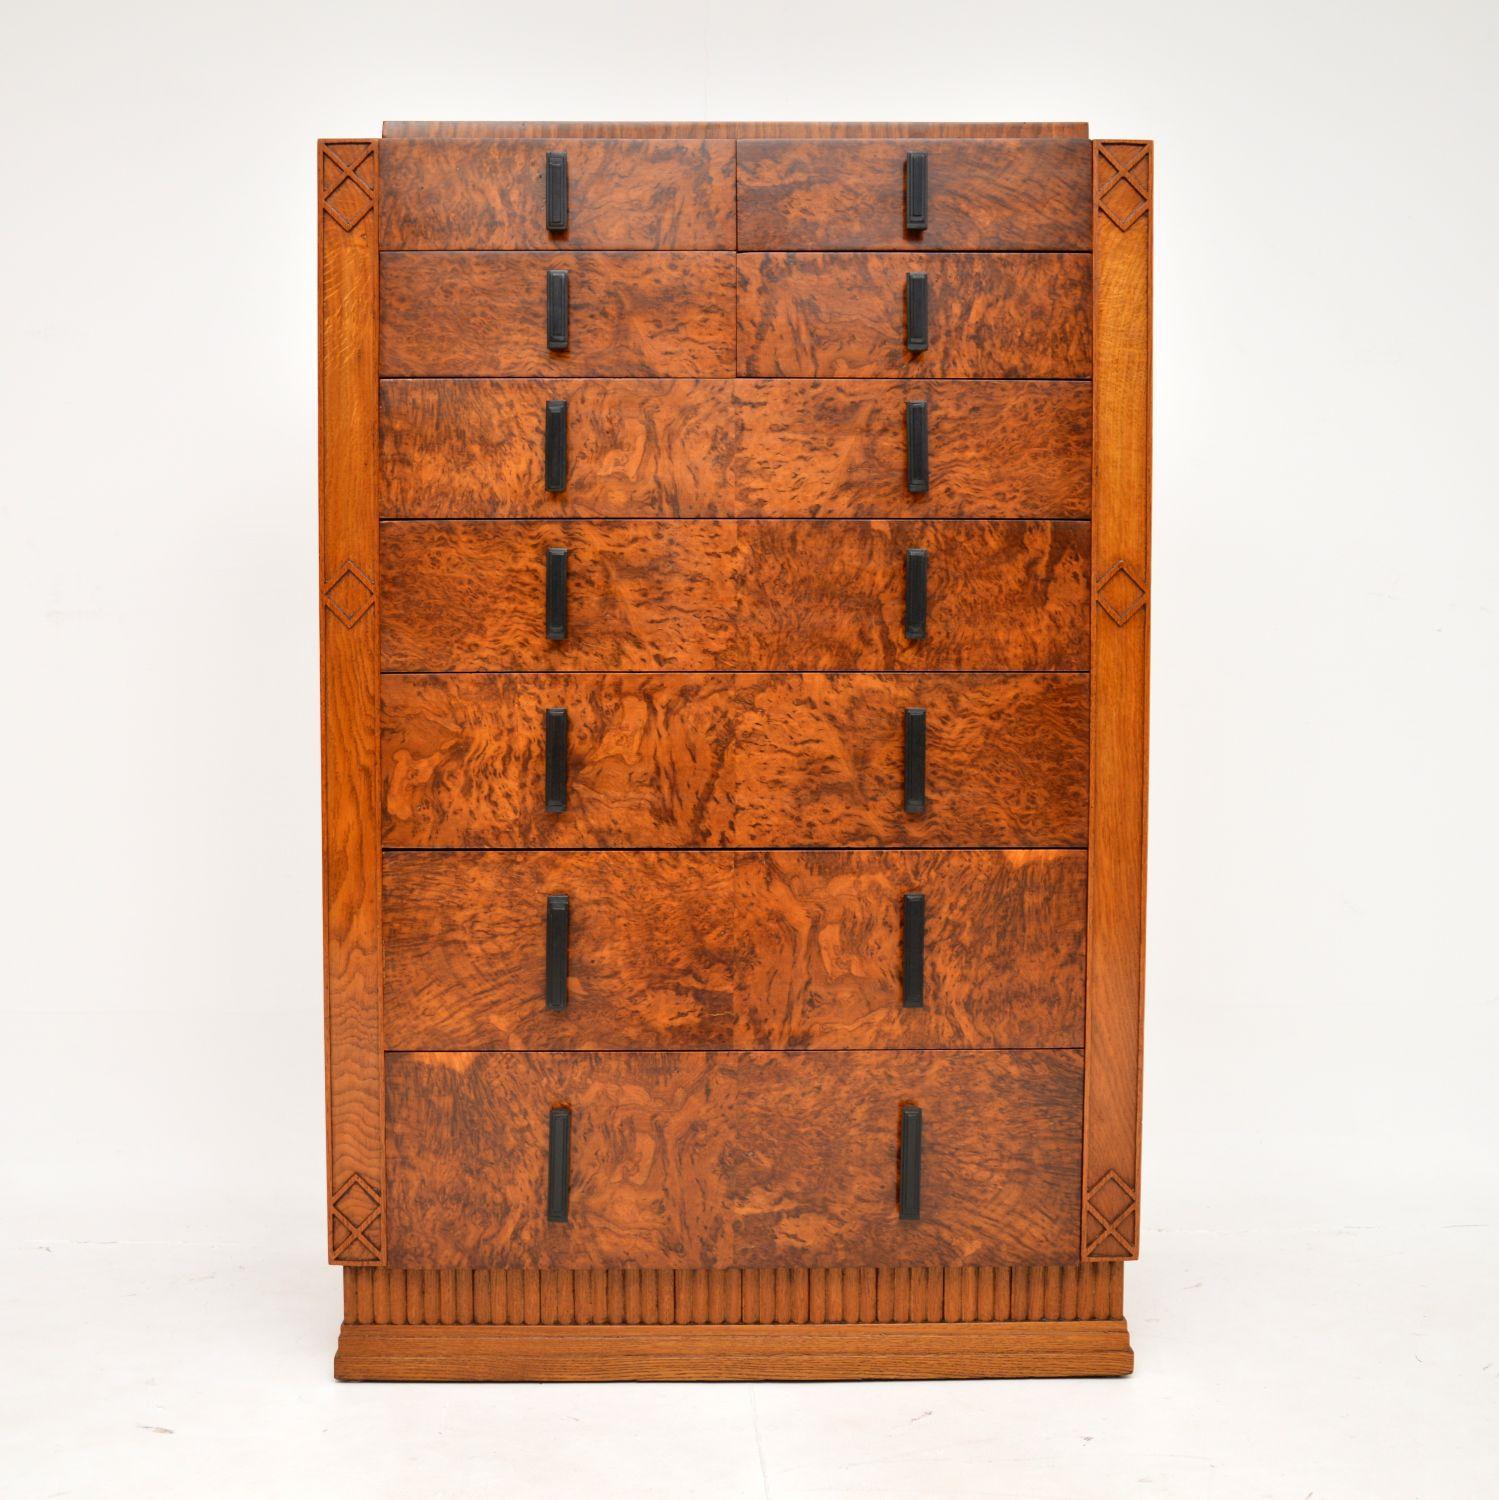 An absolutely stunning original Art Deco period tallboy chest of drawers in pollard oak. This was made in England, it dates from the 1930’s.

The quality is superb, and there is a makers mark inside one of the drawers, it is by Ambler & Lumb Ltd.